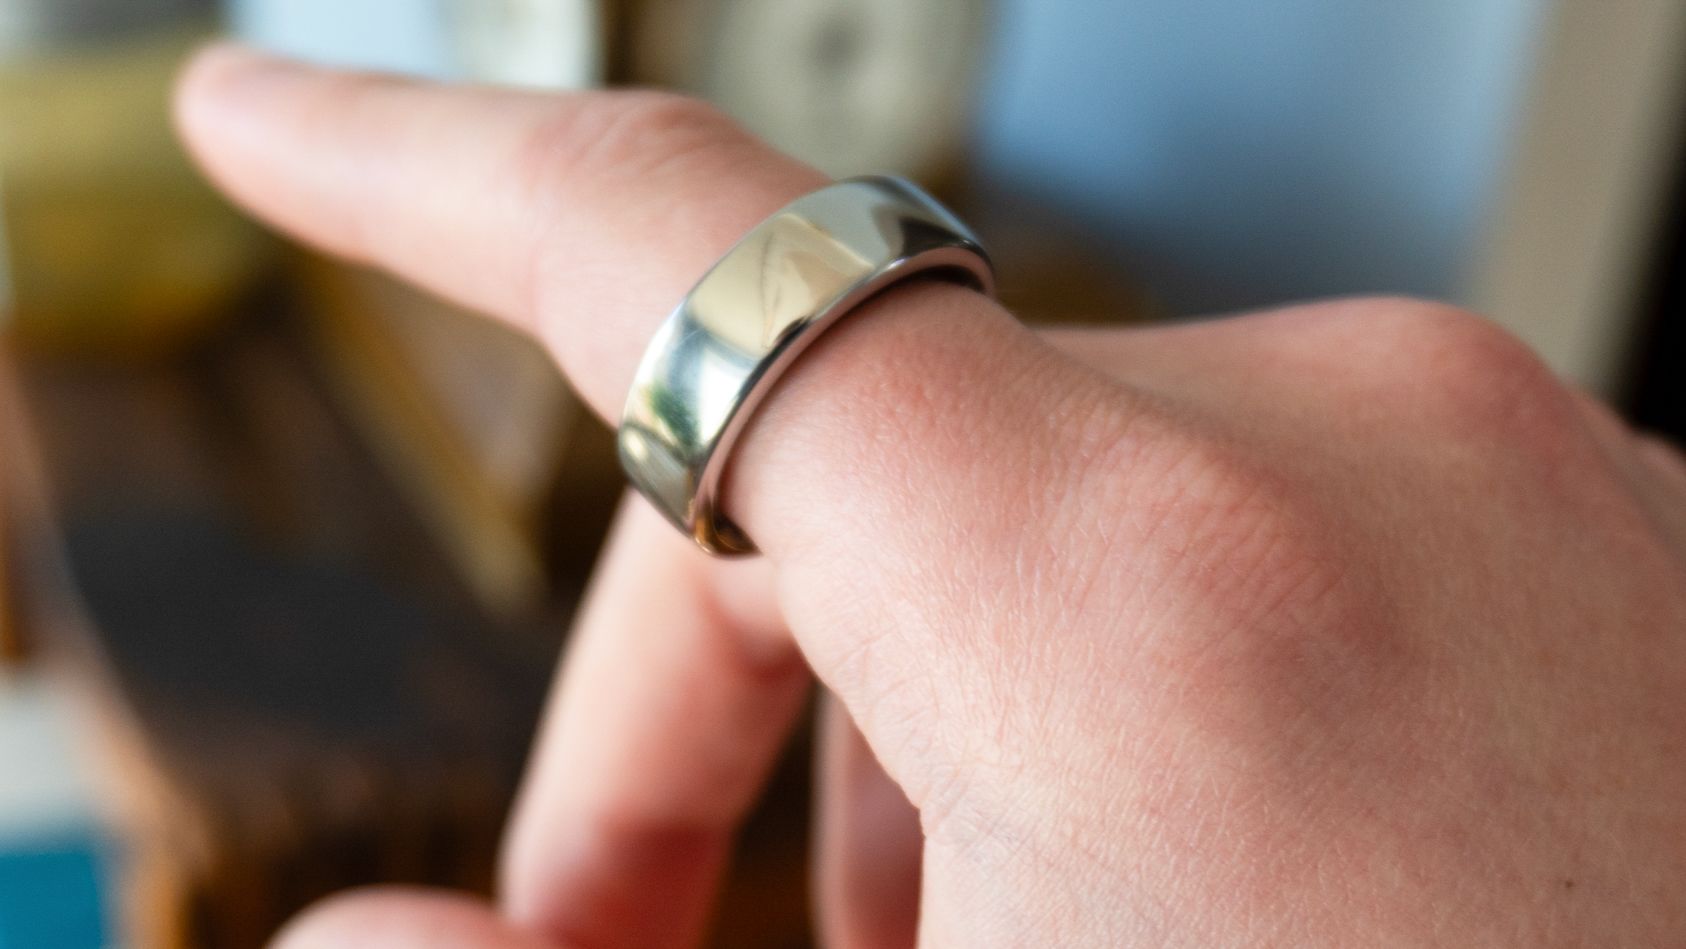 The Oura Ring is the personal health tracking device to beat in